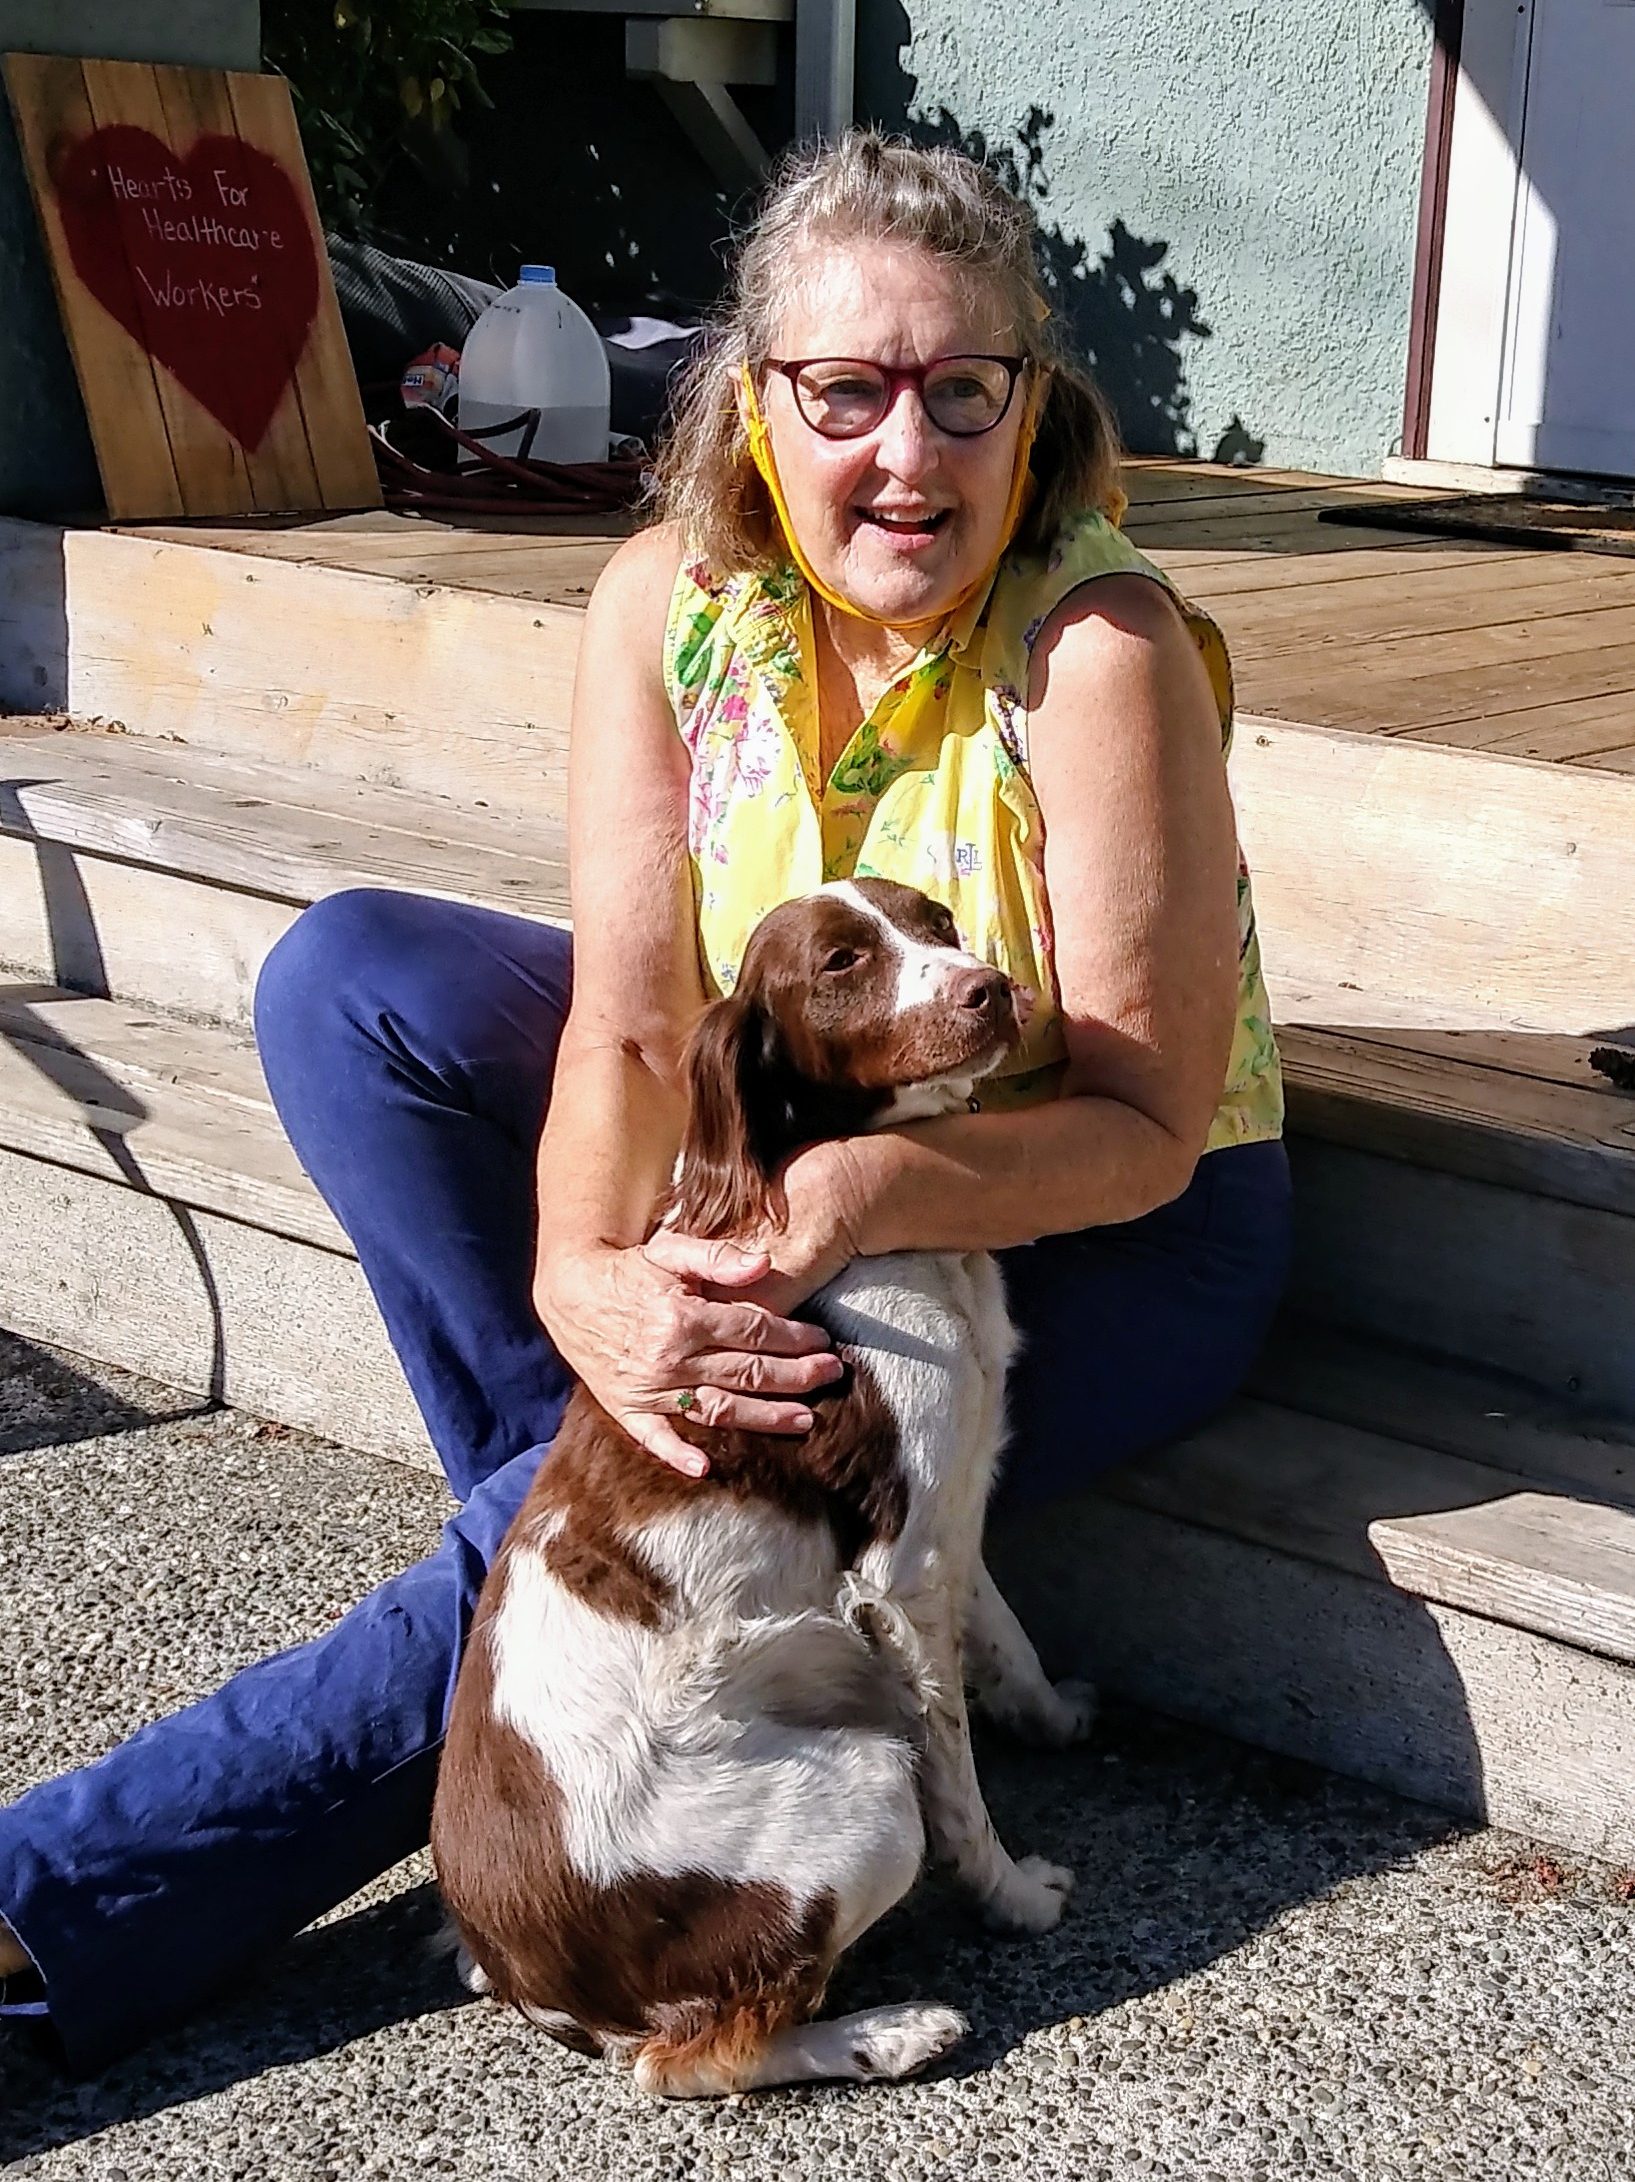 Christine Kidwell, volunteer at Transition Projects, sitting on the stairs with her dog.